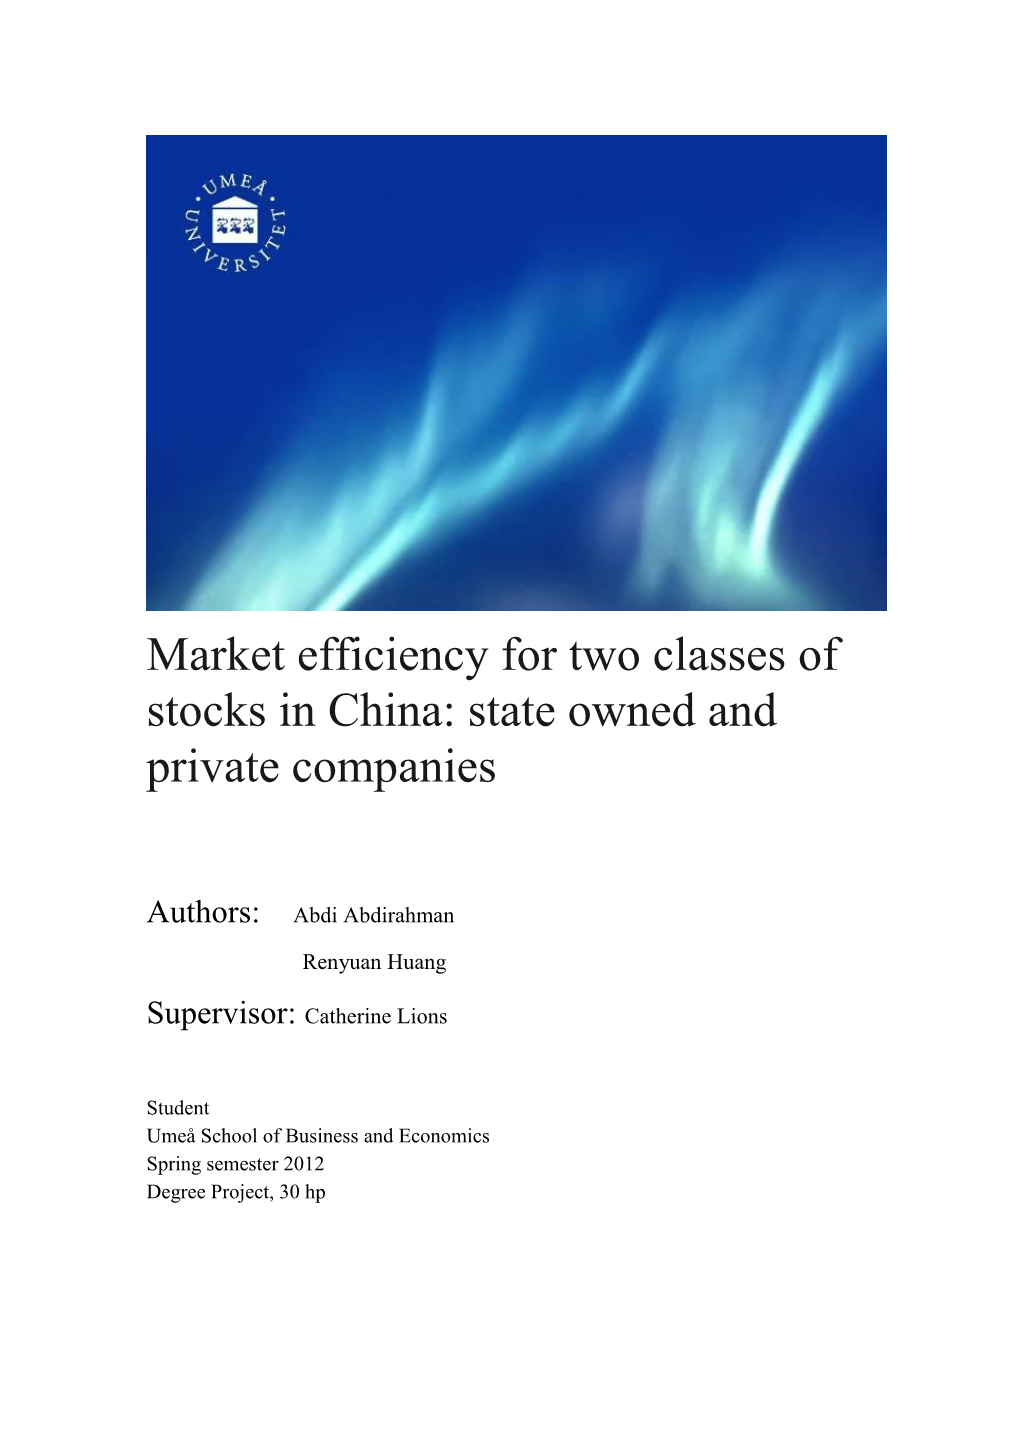 Market Efficiency for Two Classes of Stocks in China: State Owned and Private Companies